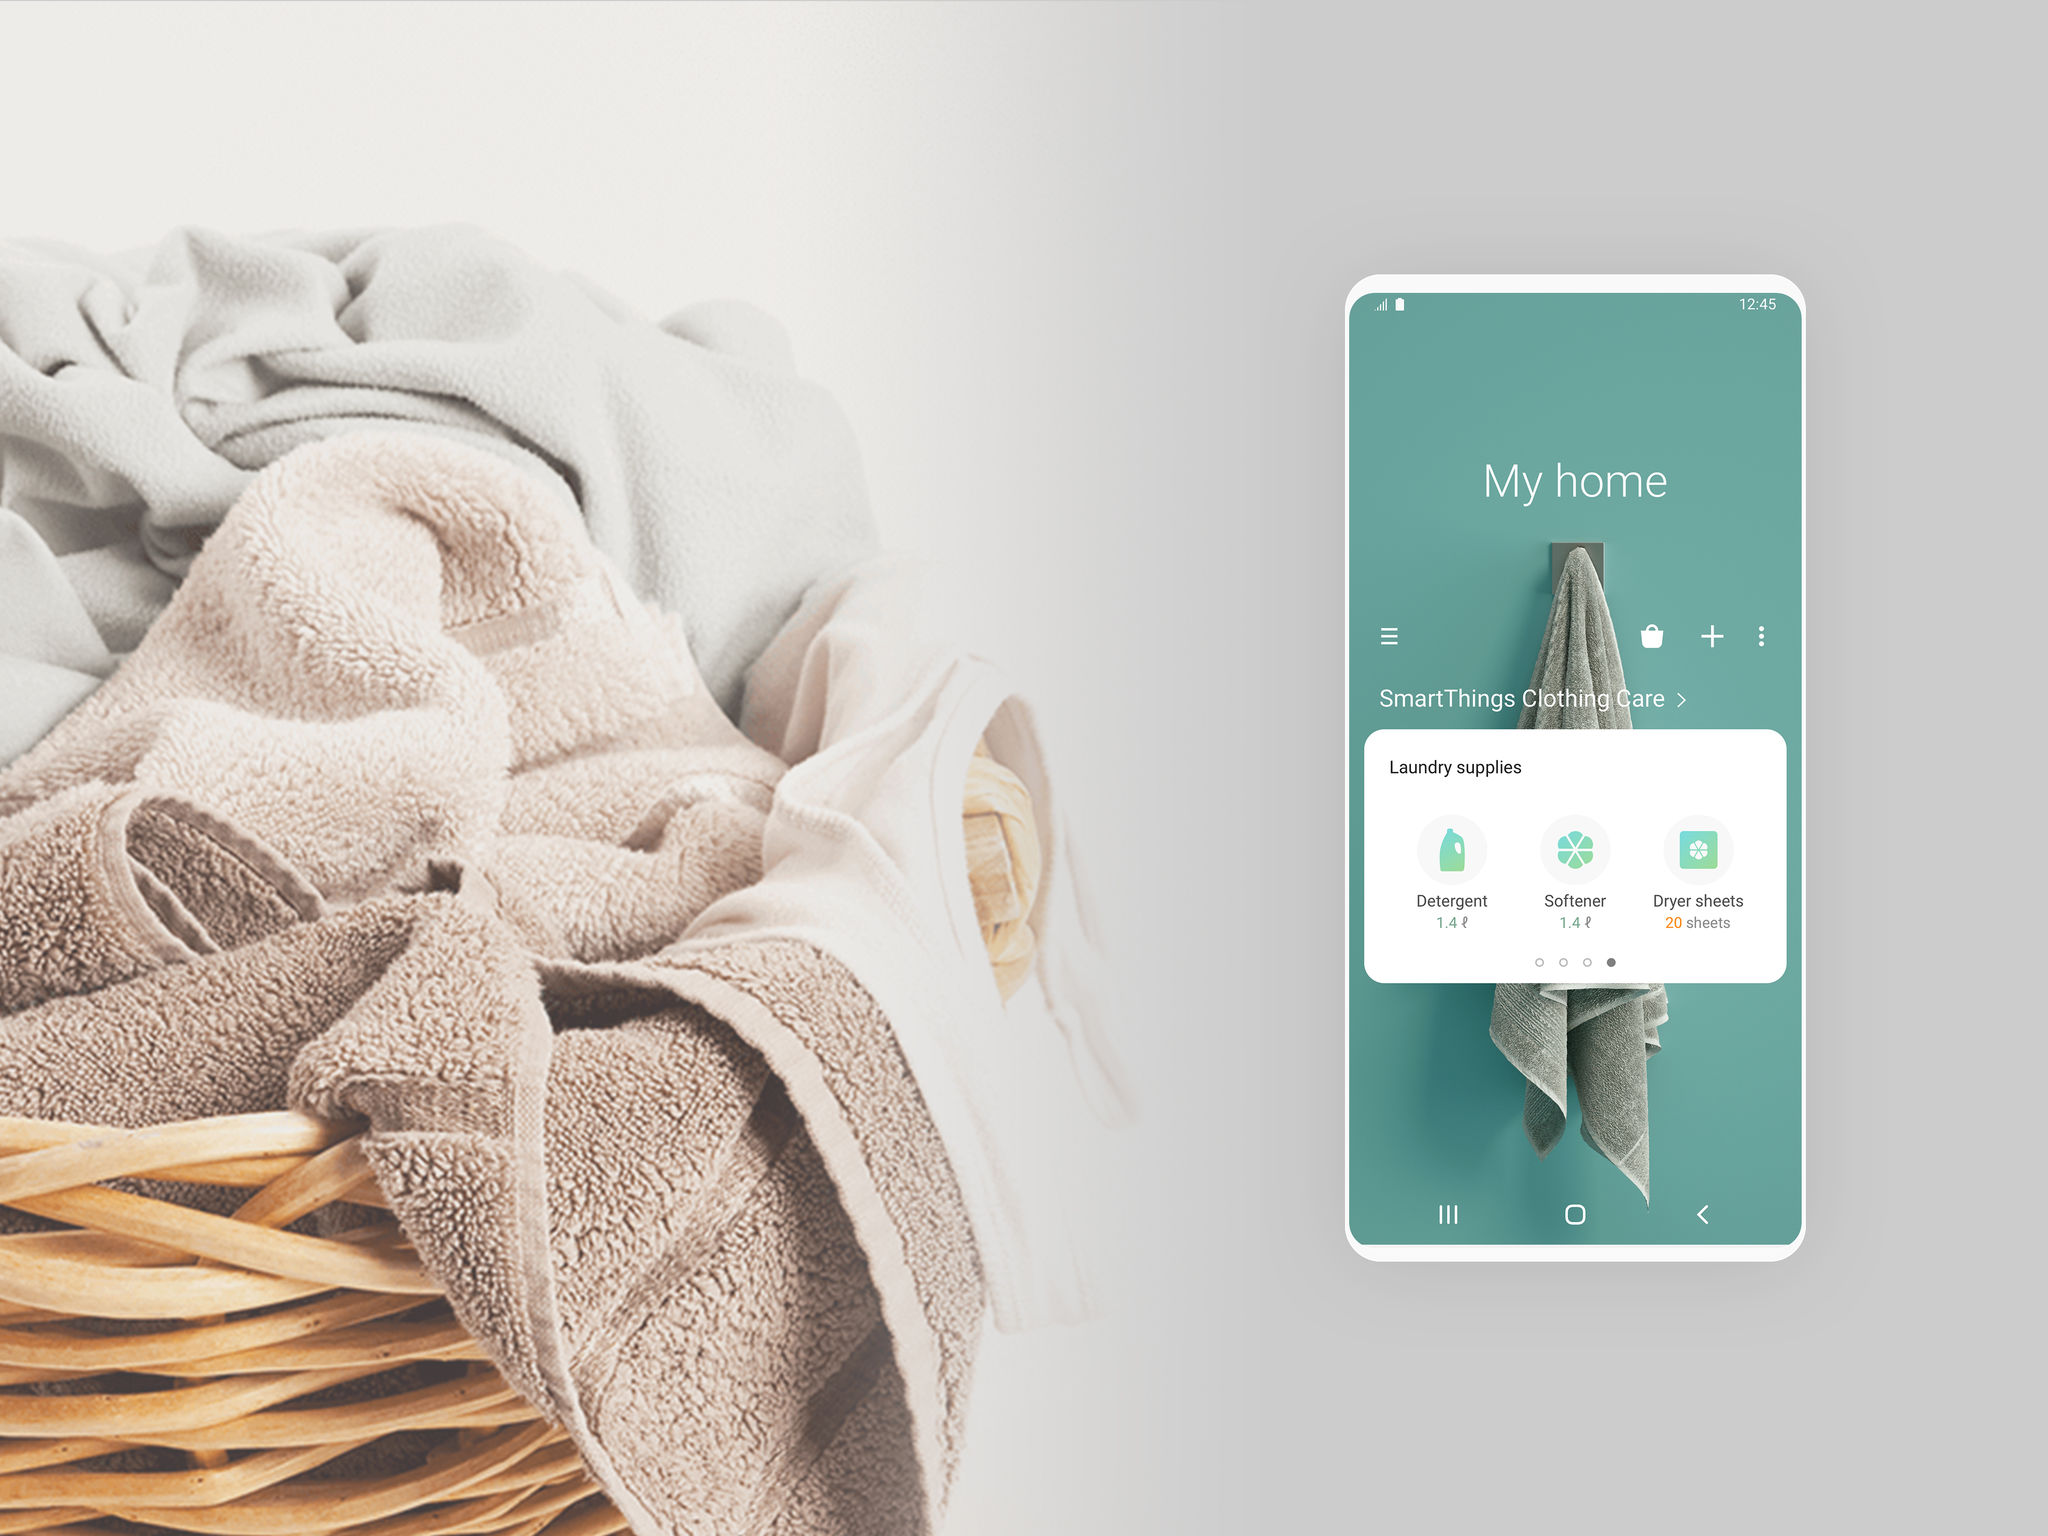 SmartThings Clothing Care